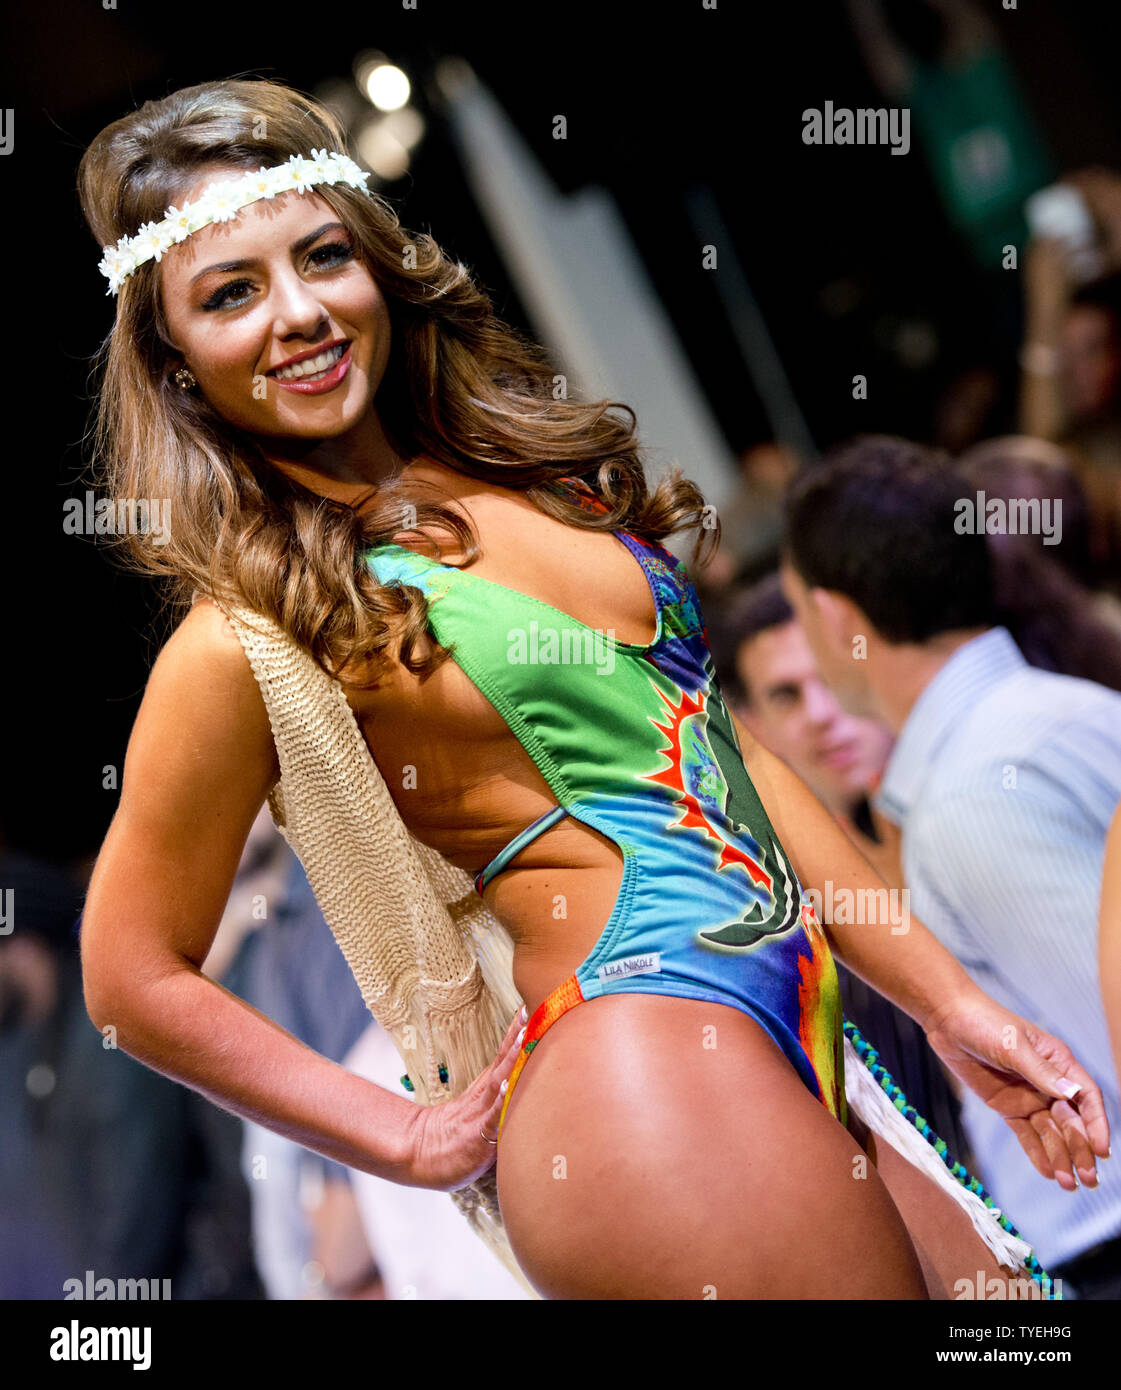 A Miami Dolphin cheerleader presents a swimsuit creation by Lila Nikole designer during the Miami Dolphins Cheerleaders 2014 Swimsuit Calendar Unveiling  at the  LIV Nightclub, Fontainebleau Hotel, Miami Beach, Florida, September 5, 2013. UPI/Gary I Rothstein. Stock Photo